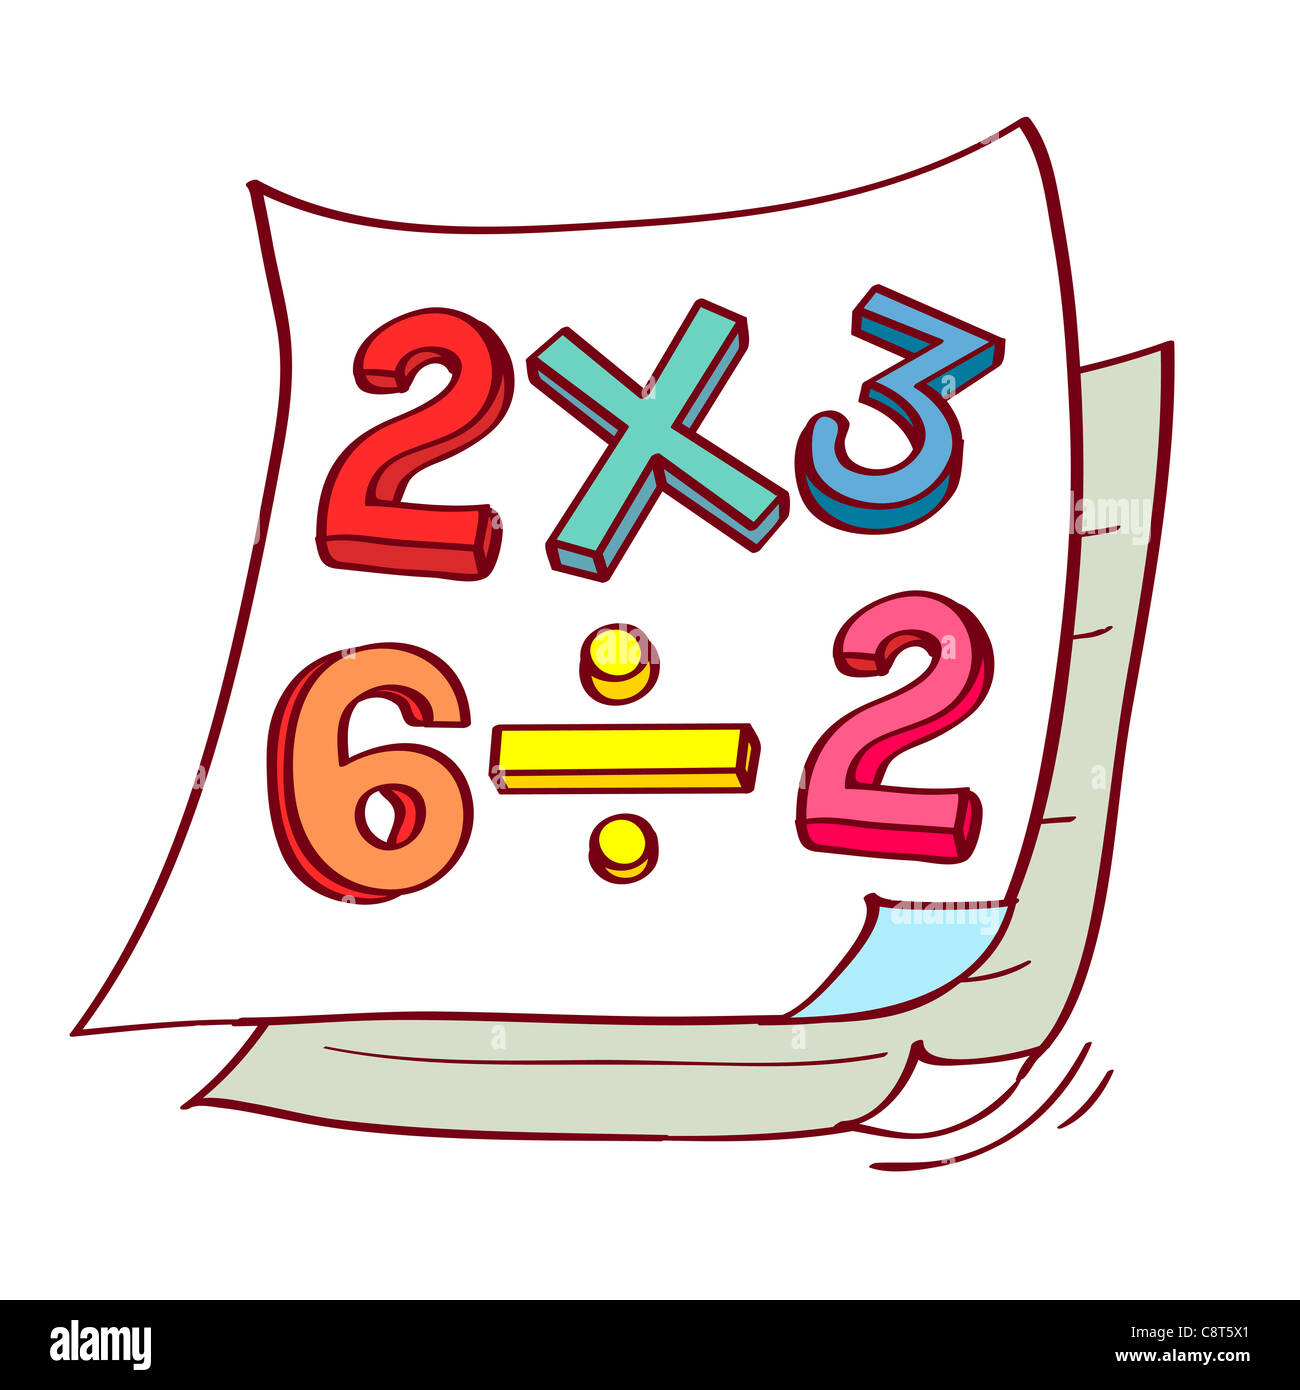 Illustration of numbers and signs Stock Photo